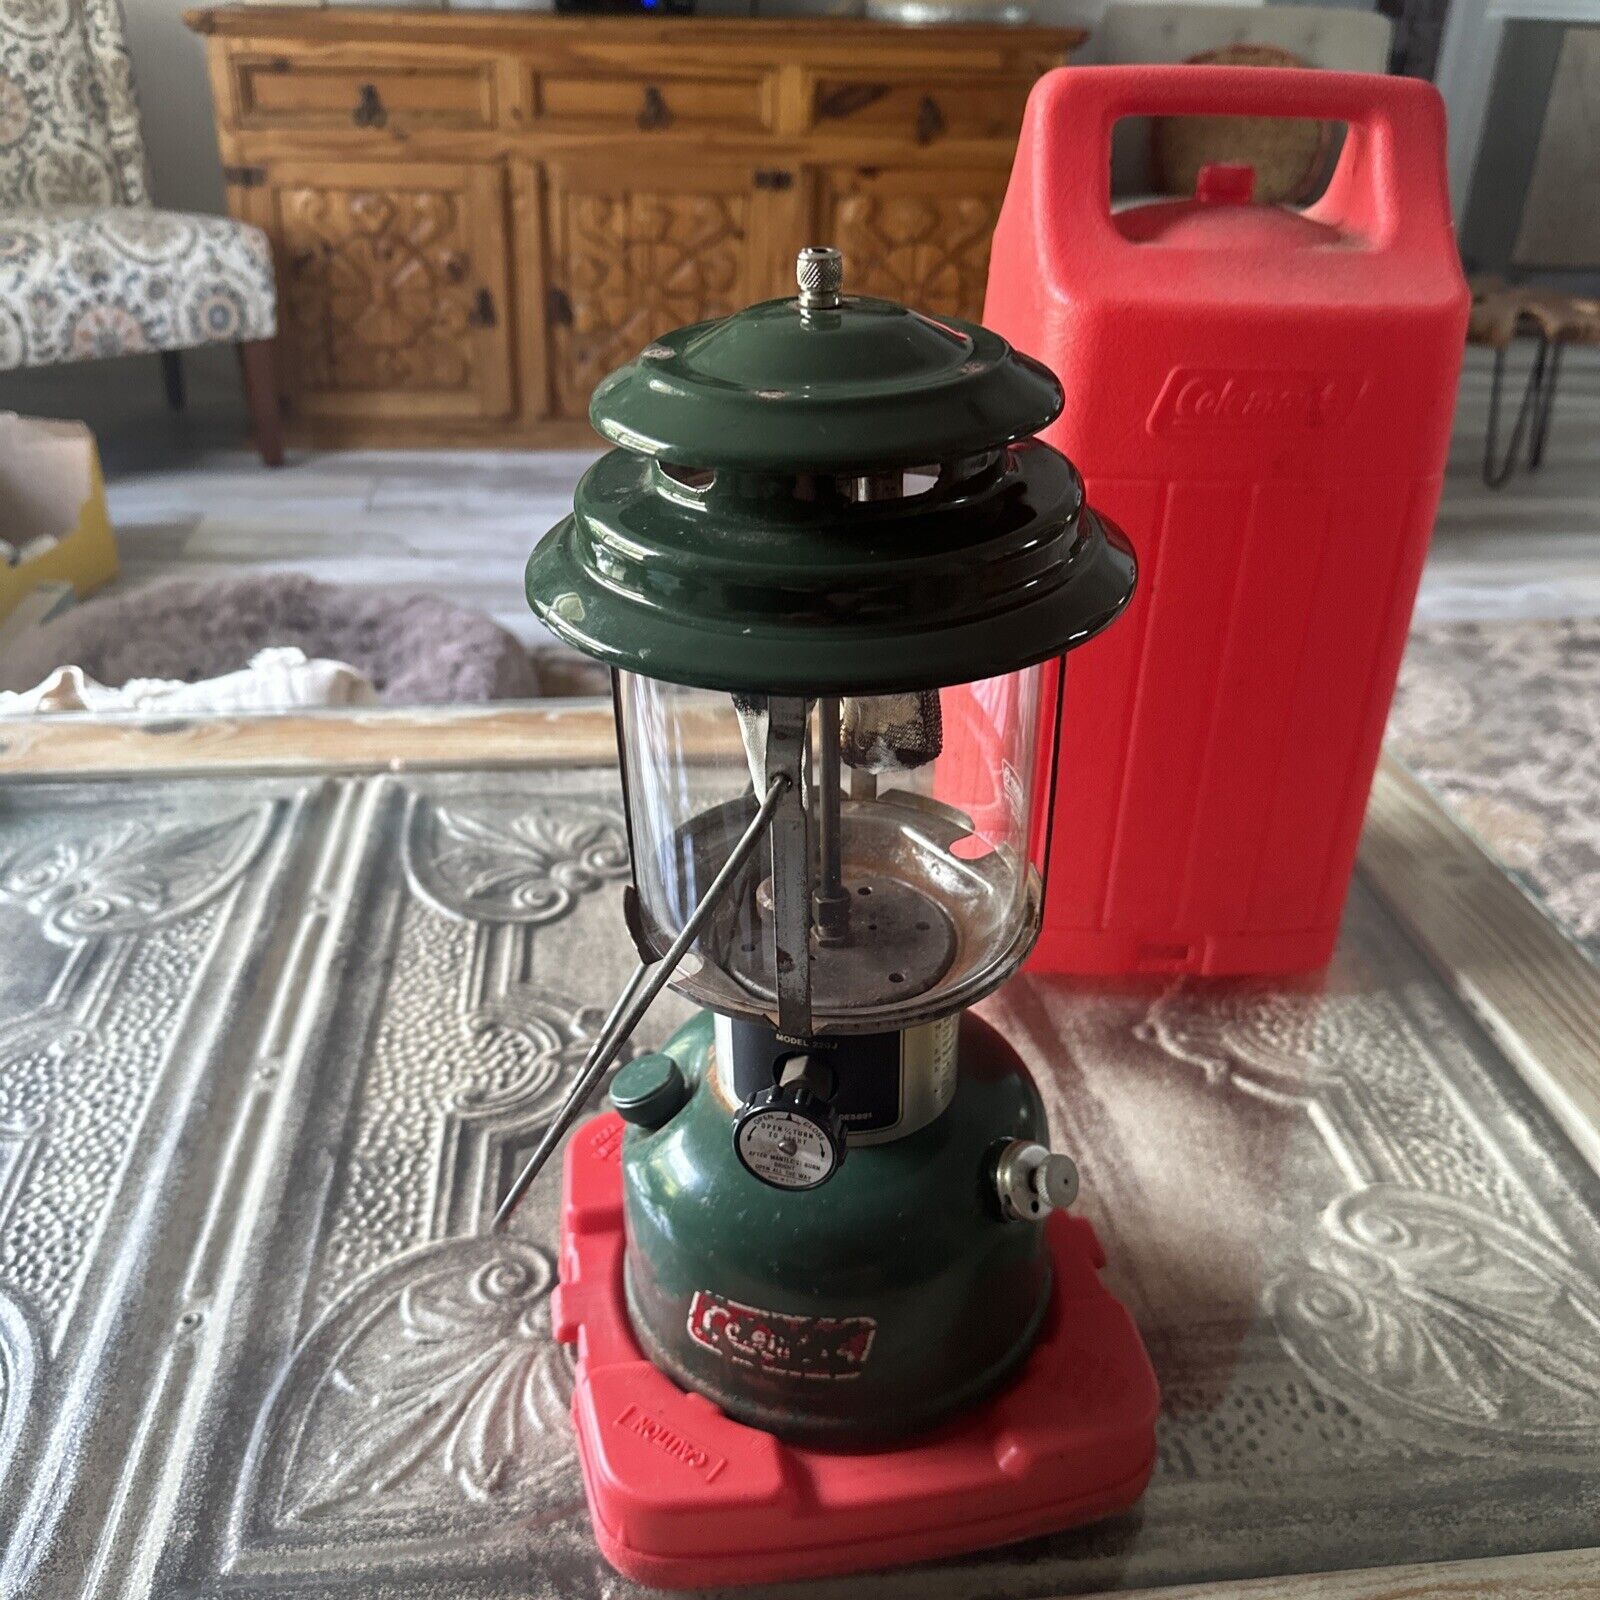 Coleman Lantern 220J 12/1976 Double Mantle Tested and Works With Case Read